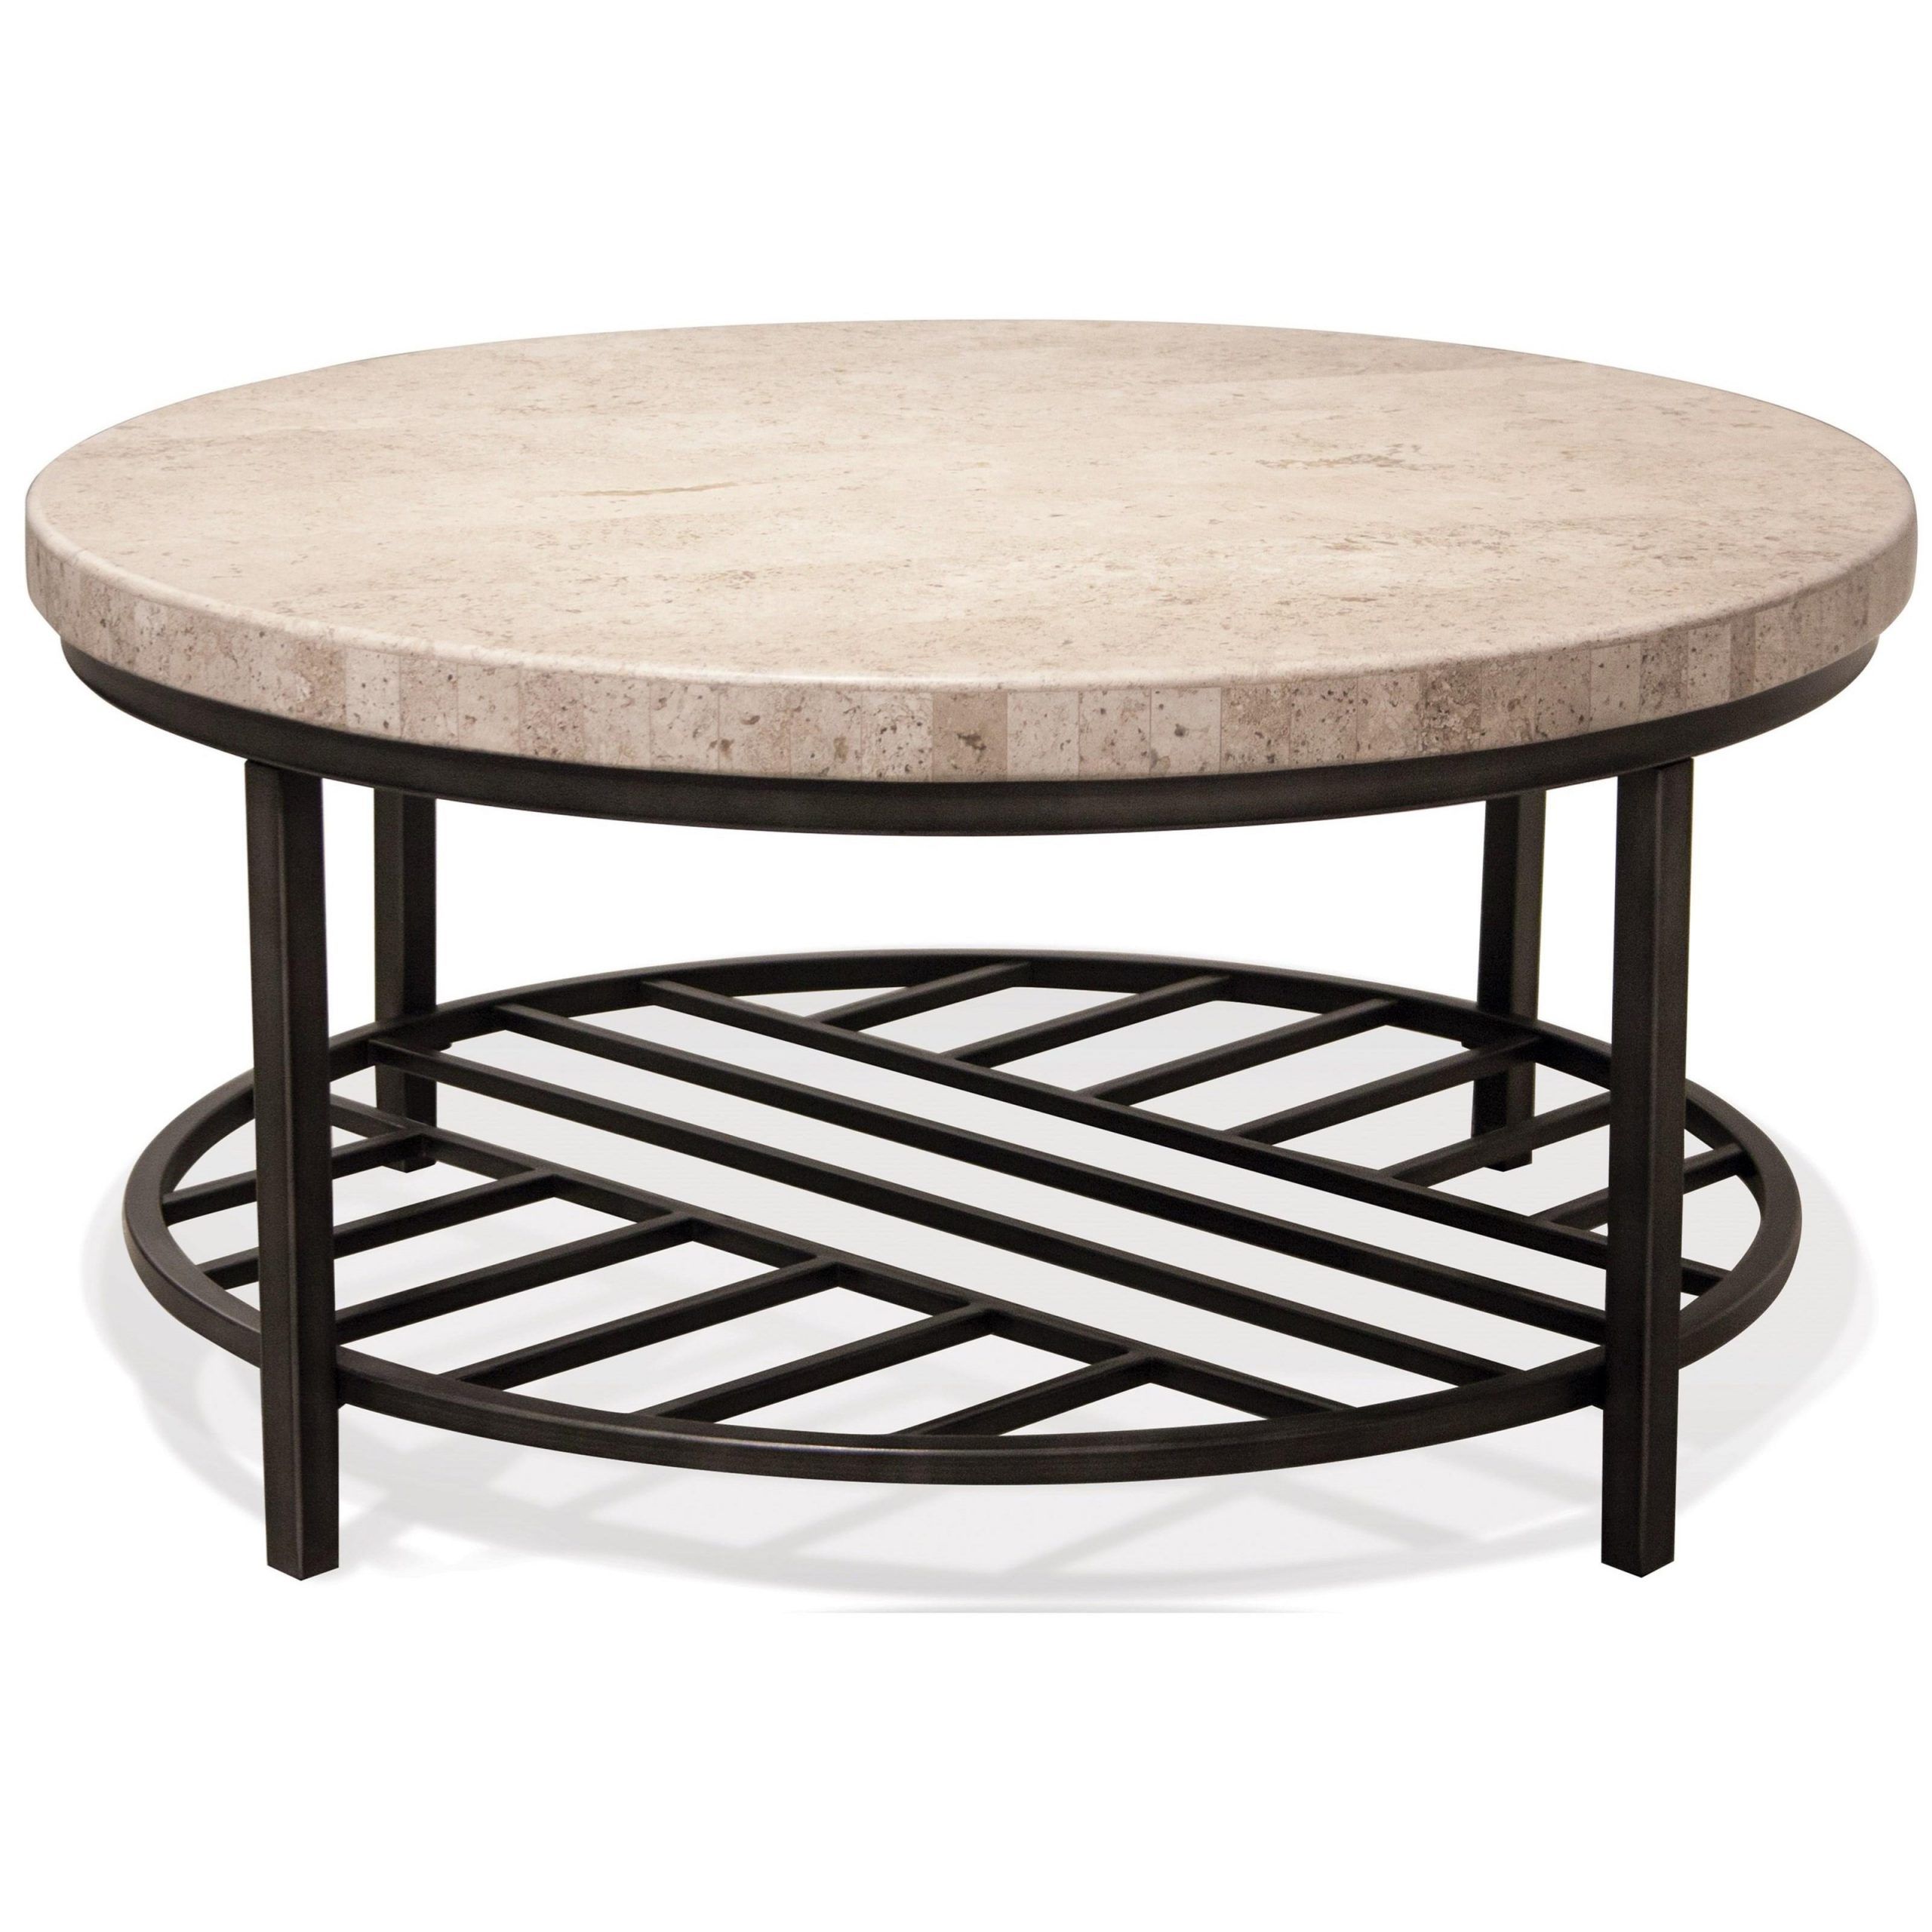 Barnside Round Cocktail Tables Intended For 2020 Riverside Furniture Capri Round Cocktail Table With Travertine Stone (View 3 of 10)